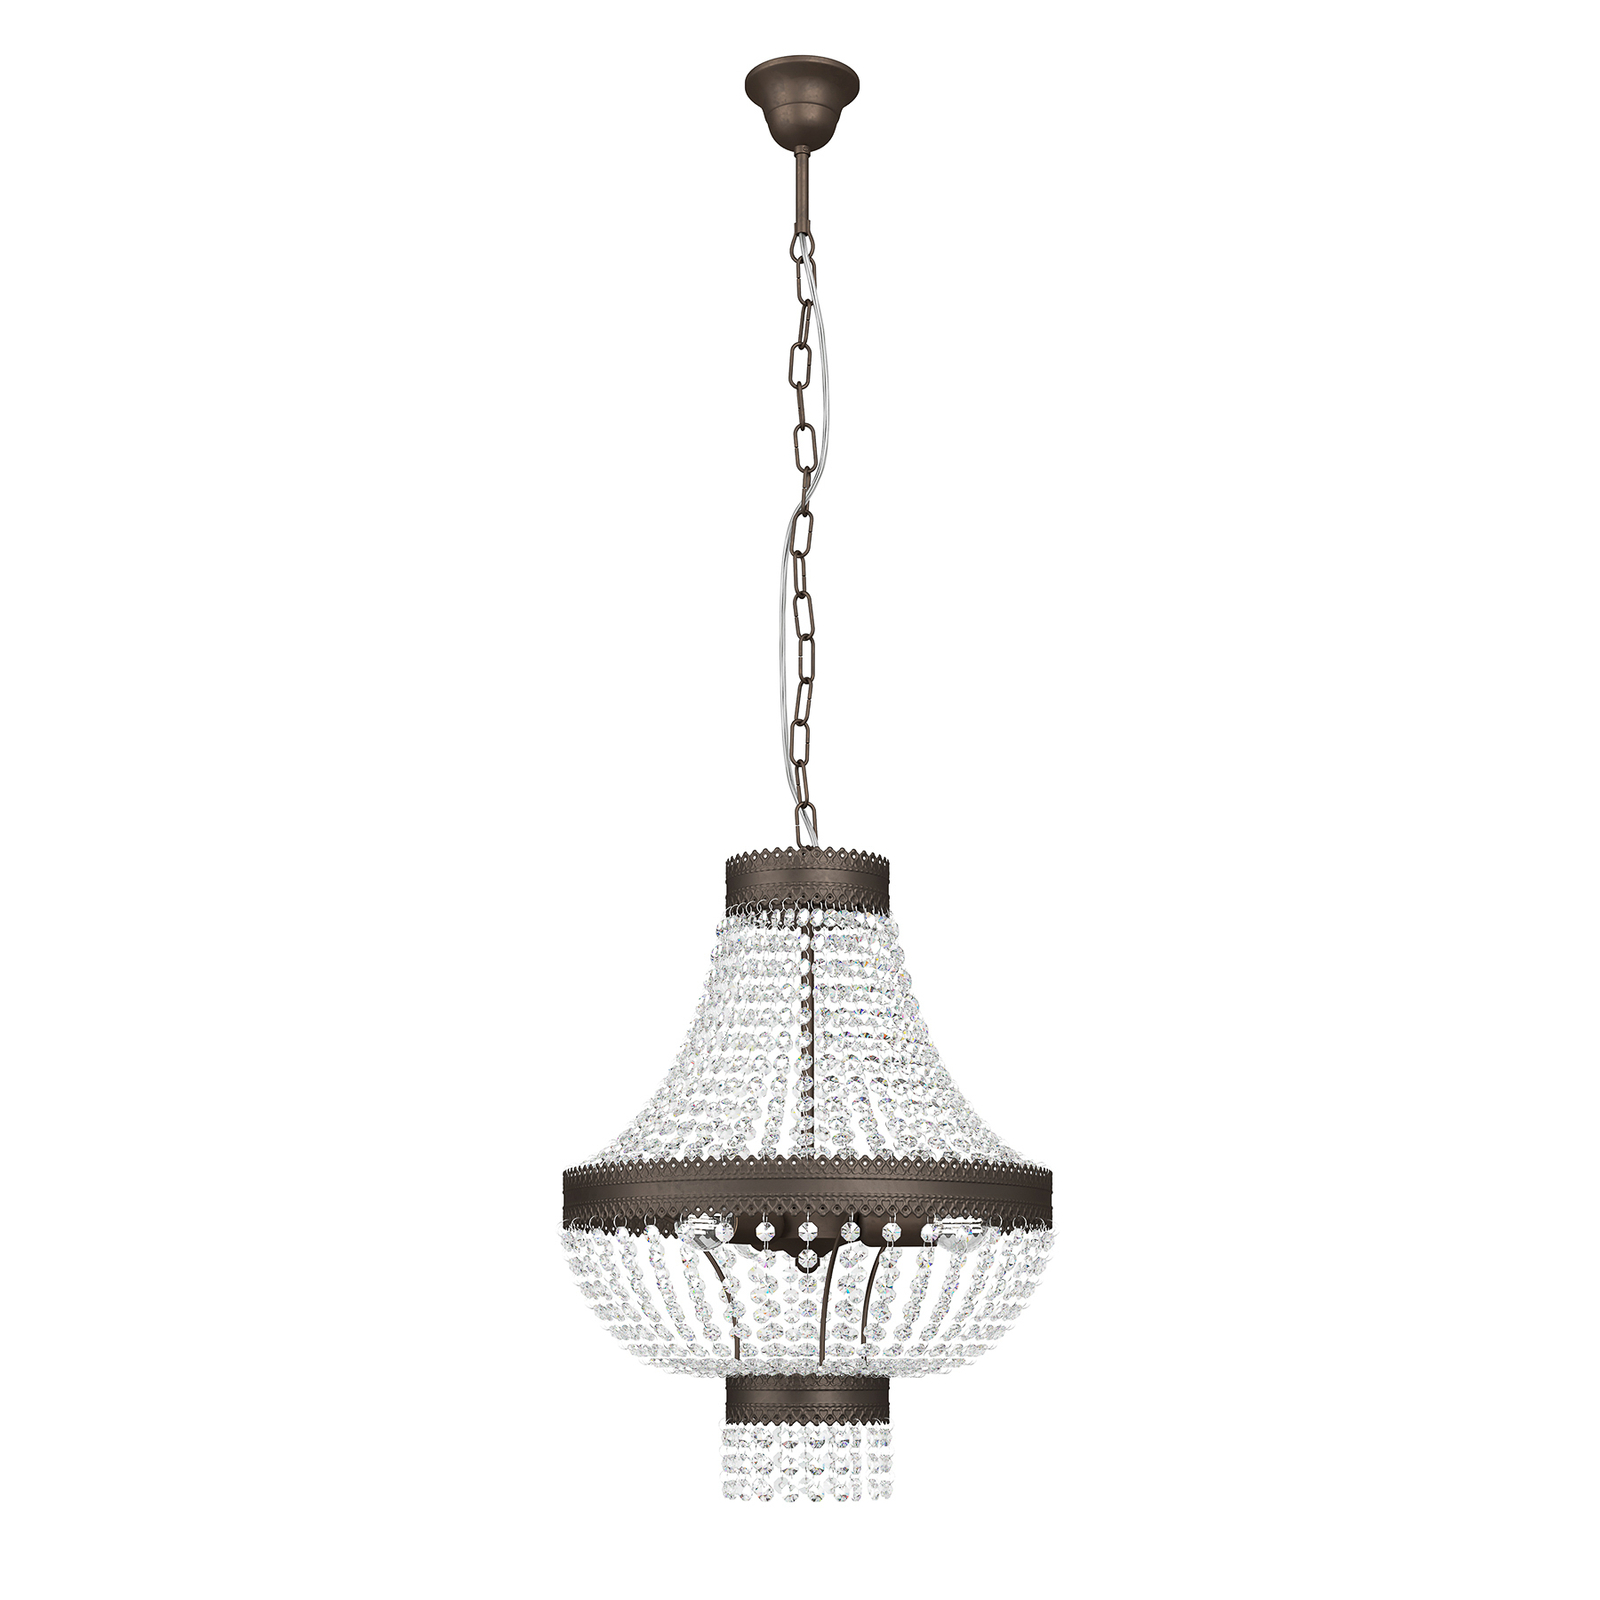 Impero hanging light with crystal elements